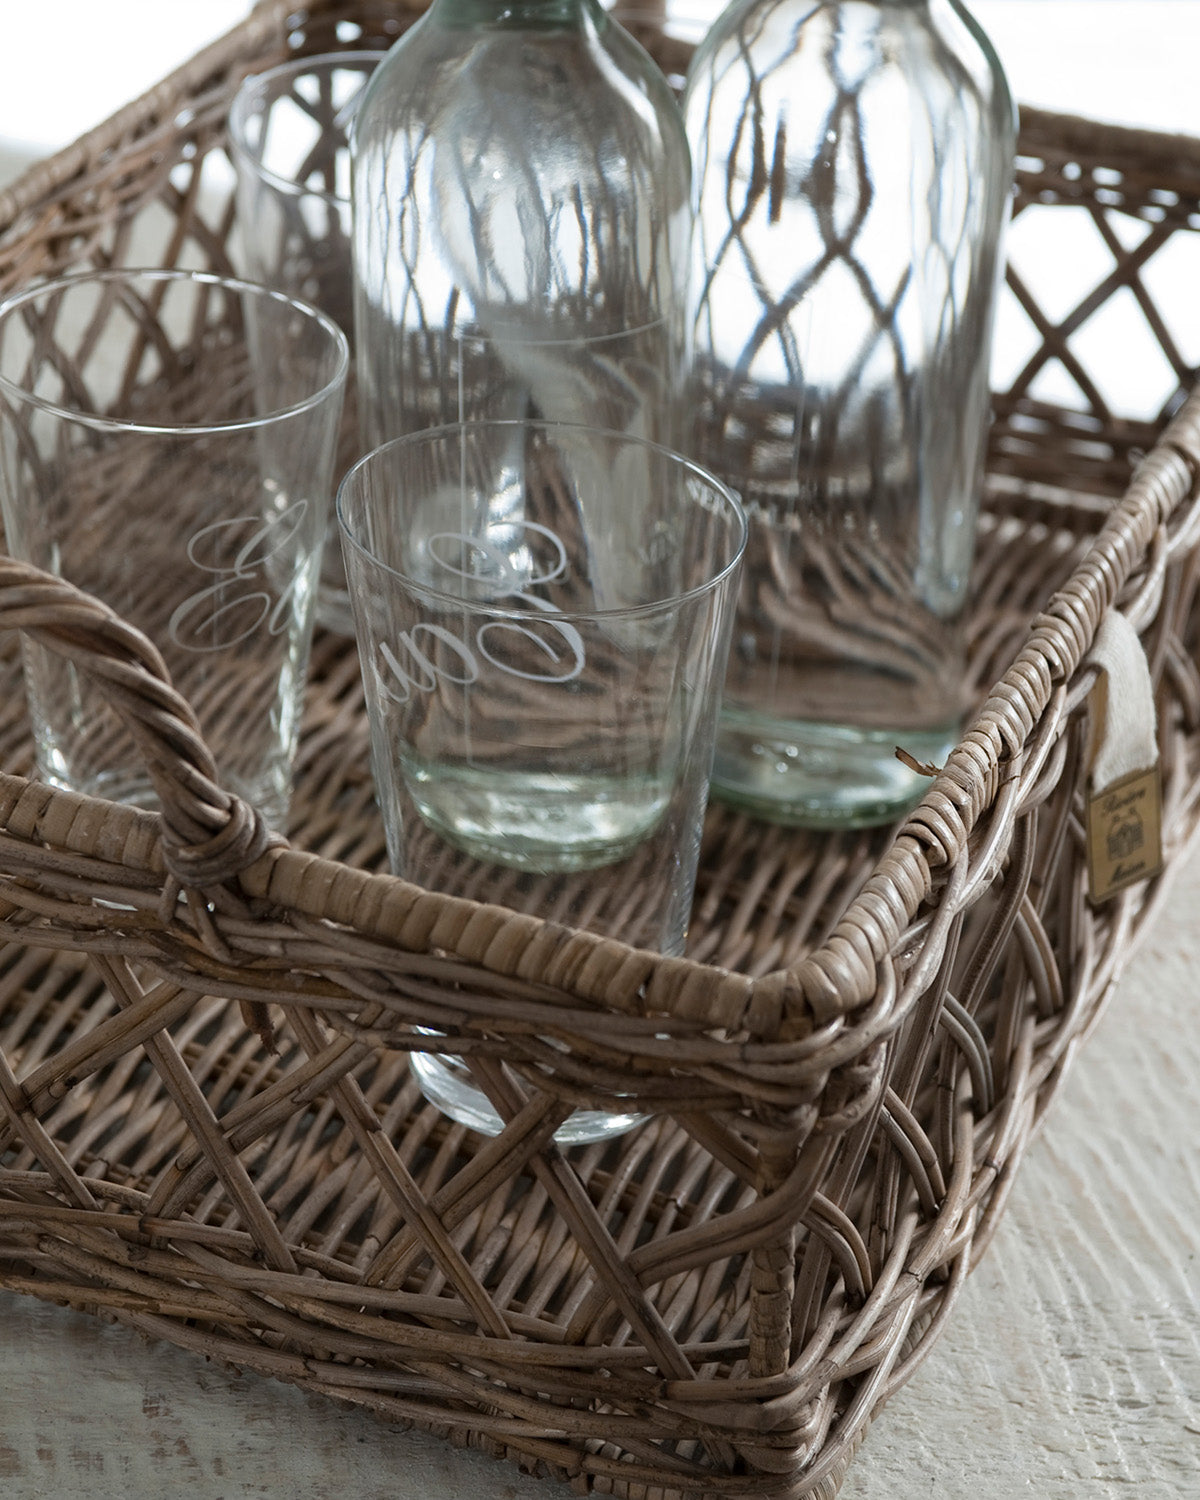 Tray made of gray reed by Riviera Maison, decorated with glasses